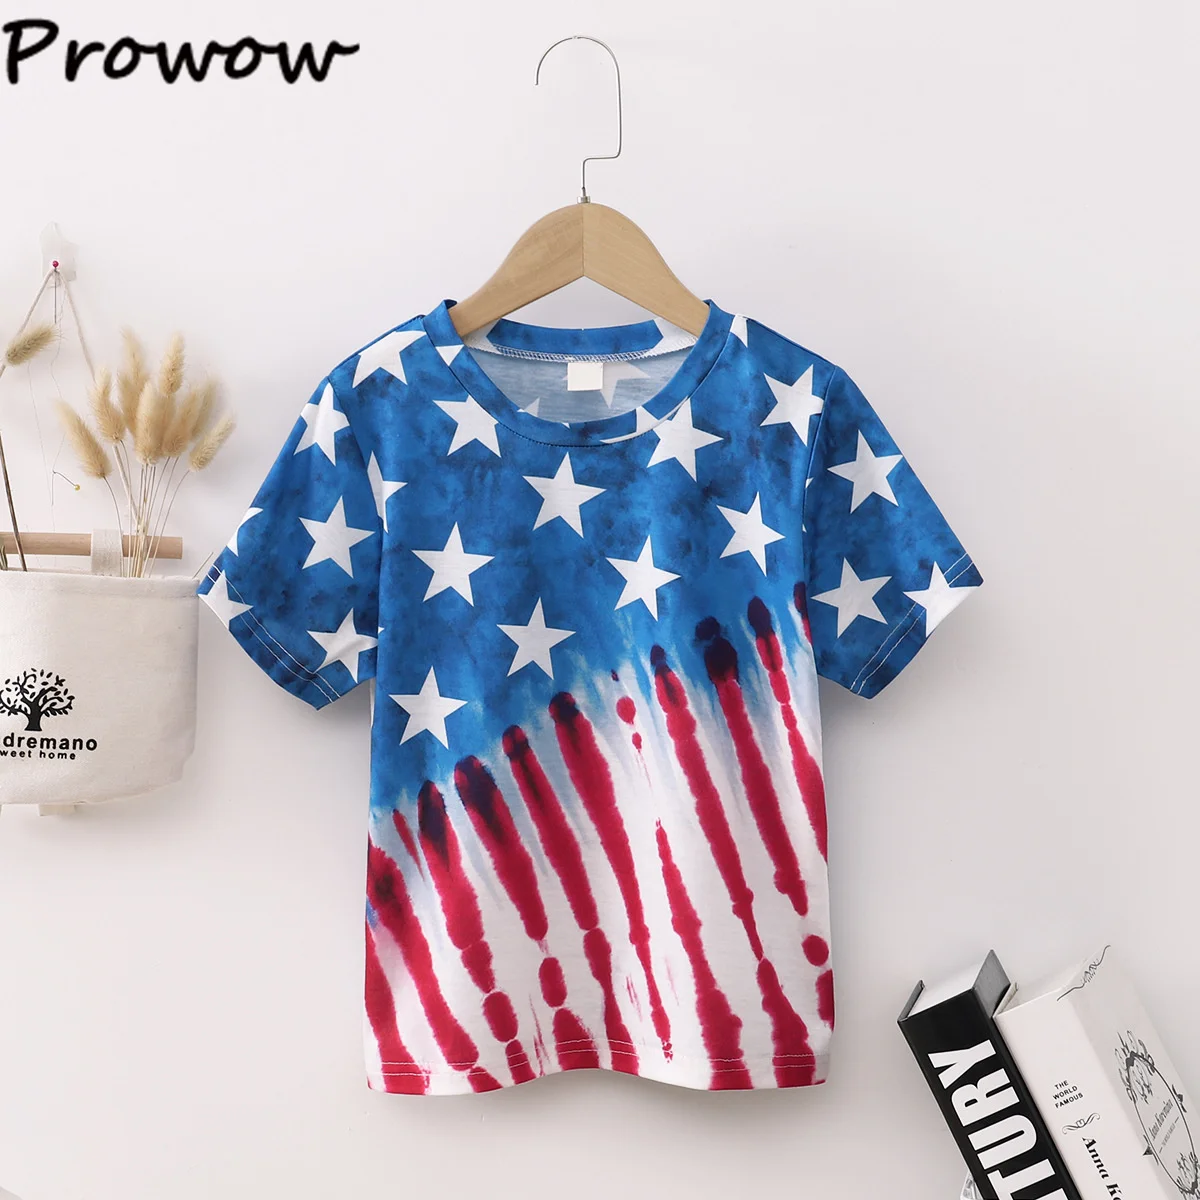 Prowow 4-12 Years Independence Day Outfits Kids Clothes Girls Blue Stars T-shirts Summer Children's Top 4th Of July Clothing T-Shirts best of sale